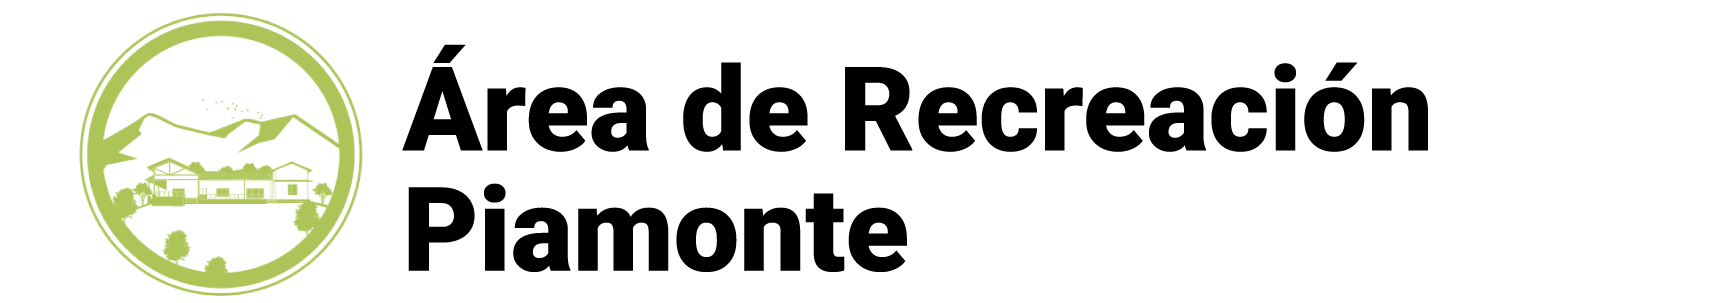 titulo-arp.png